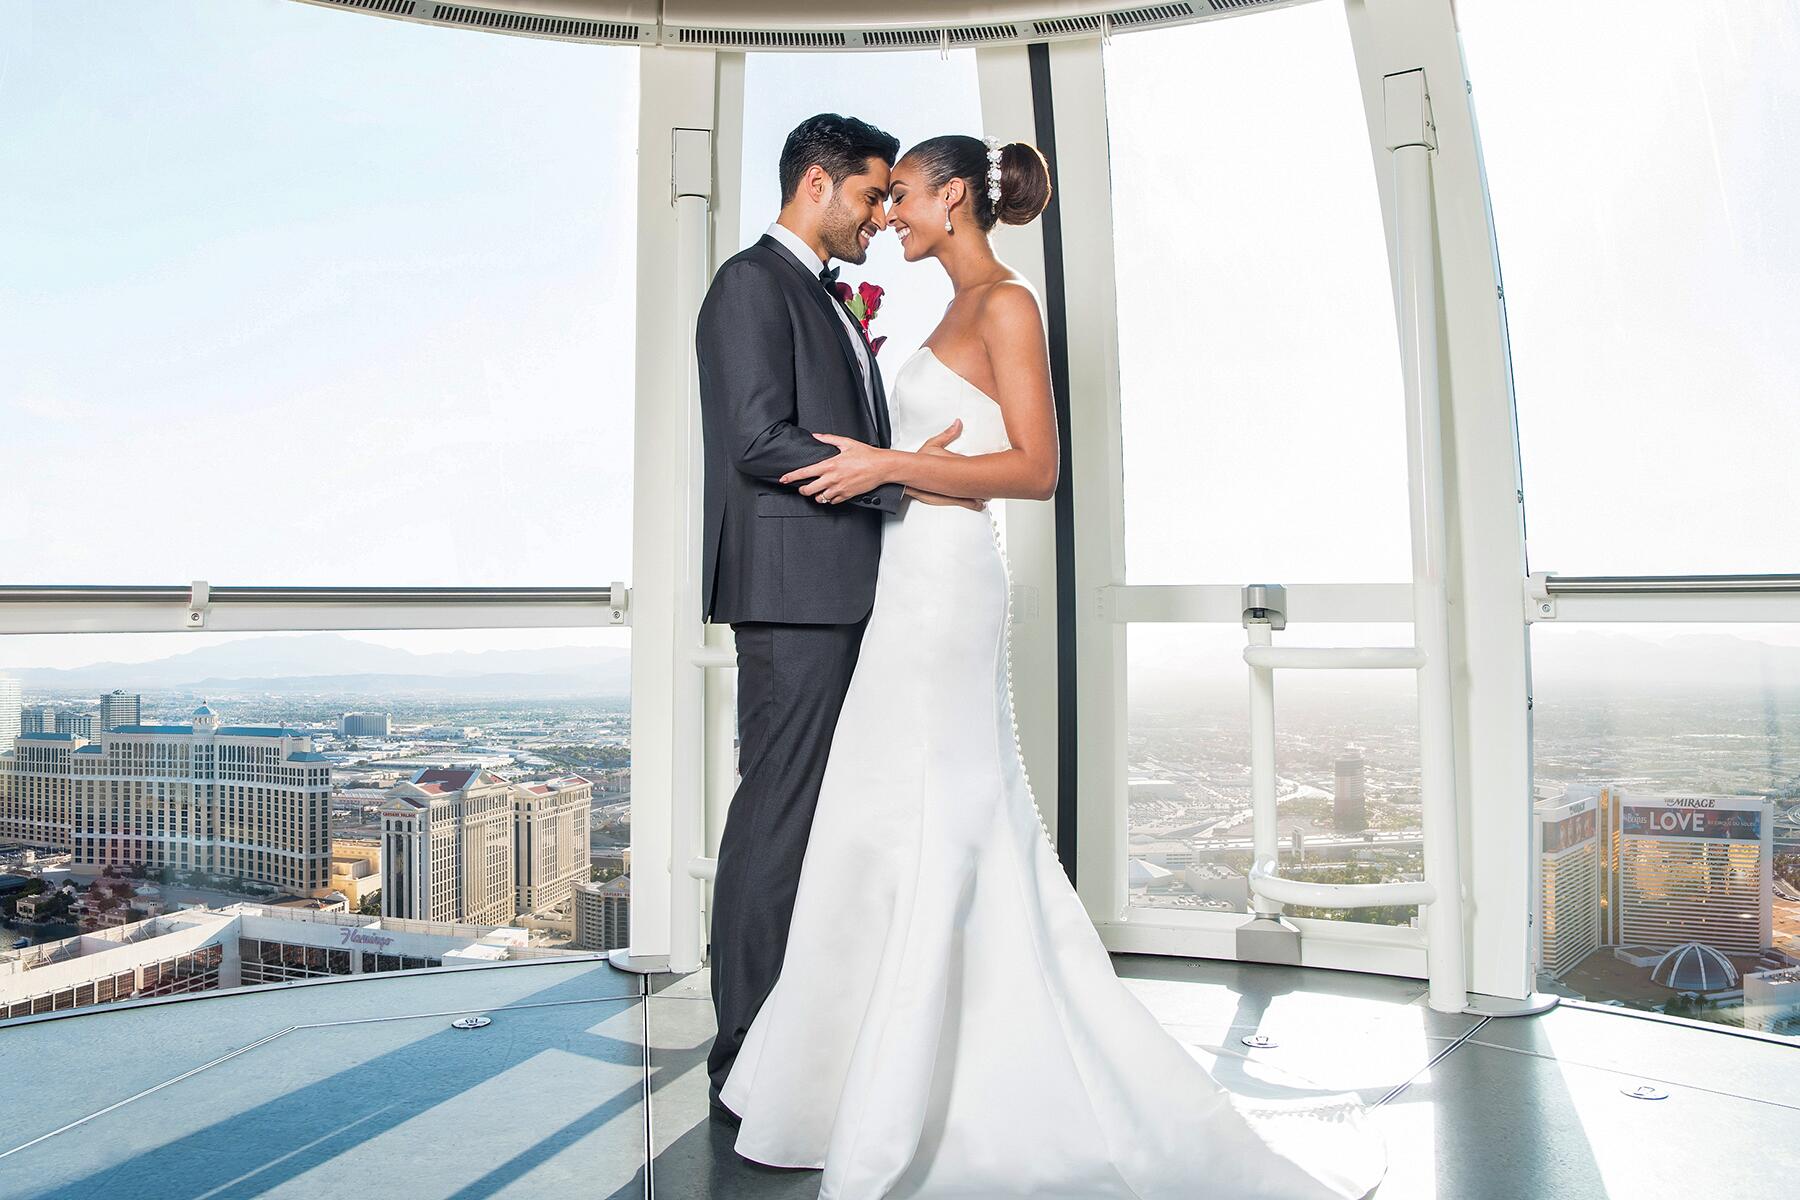 45+ Elope Melbourne Wedding Packages Pics of the year - Wedding and Dream